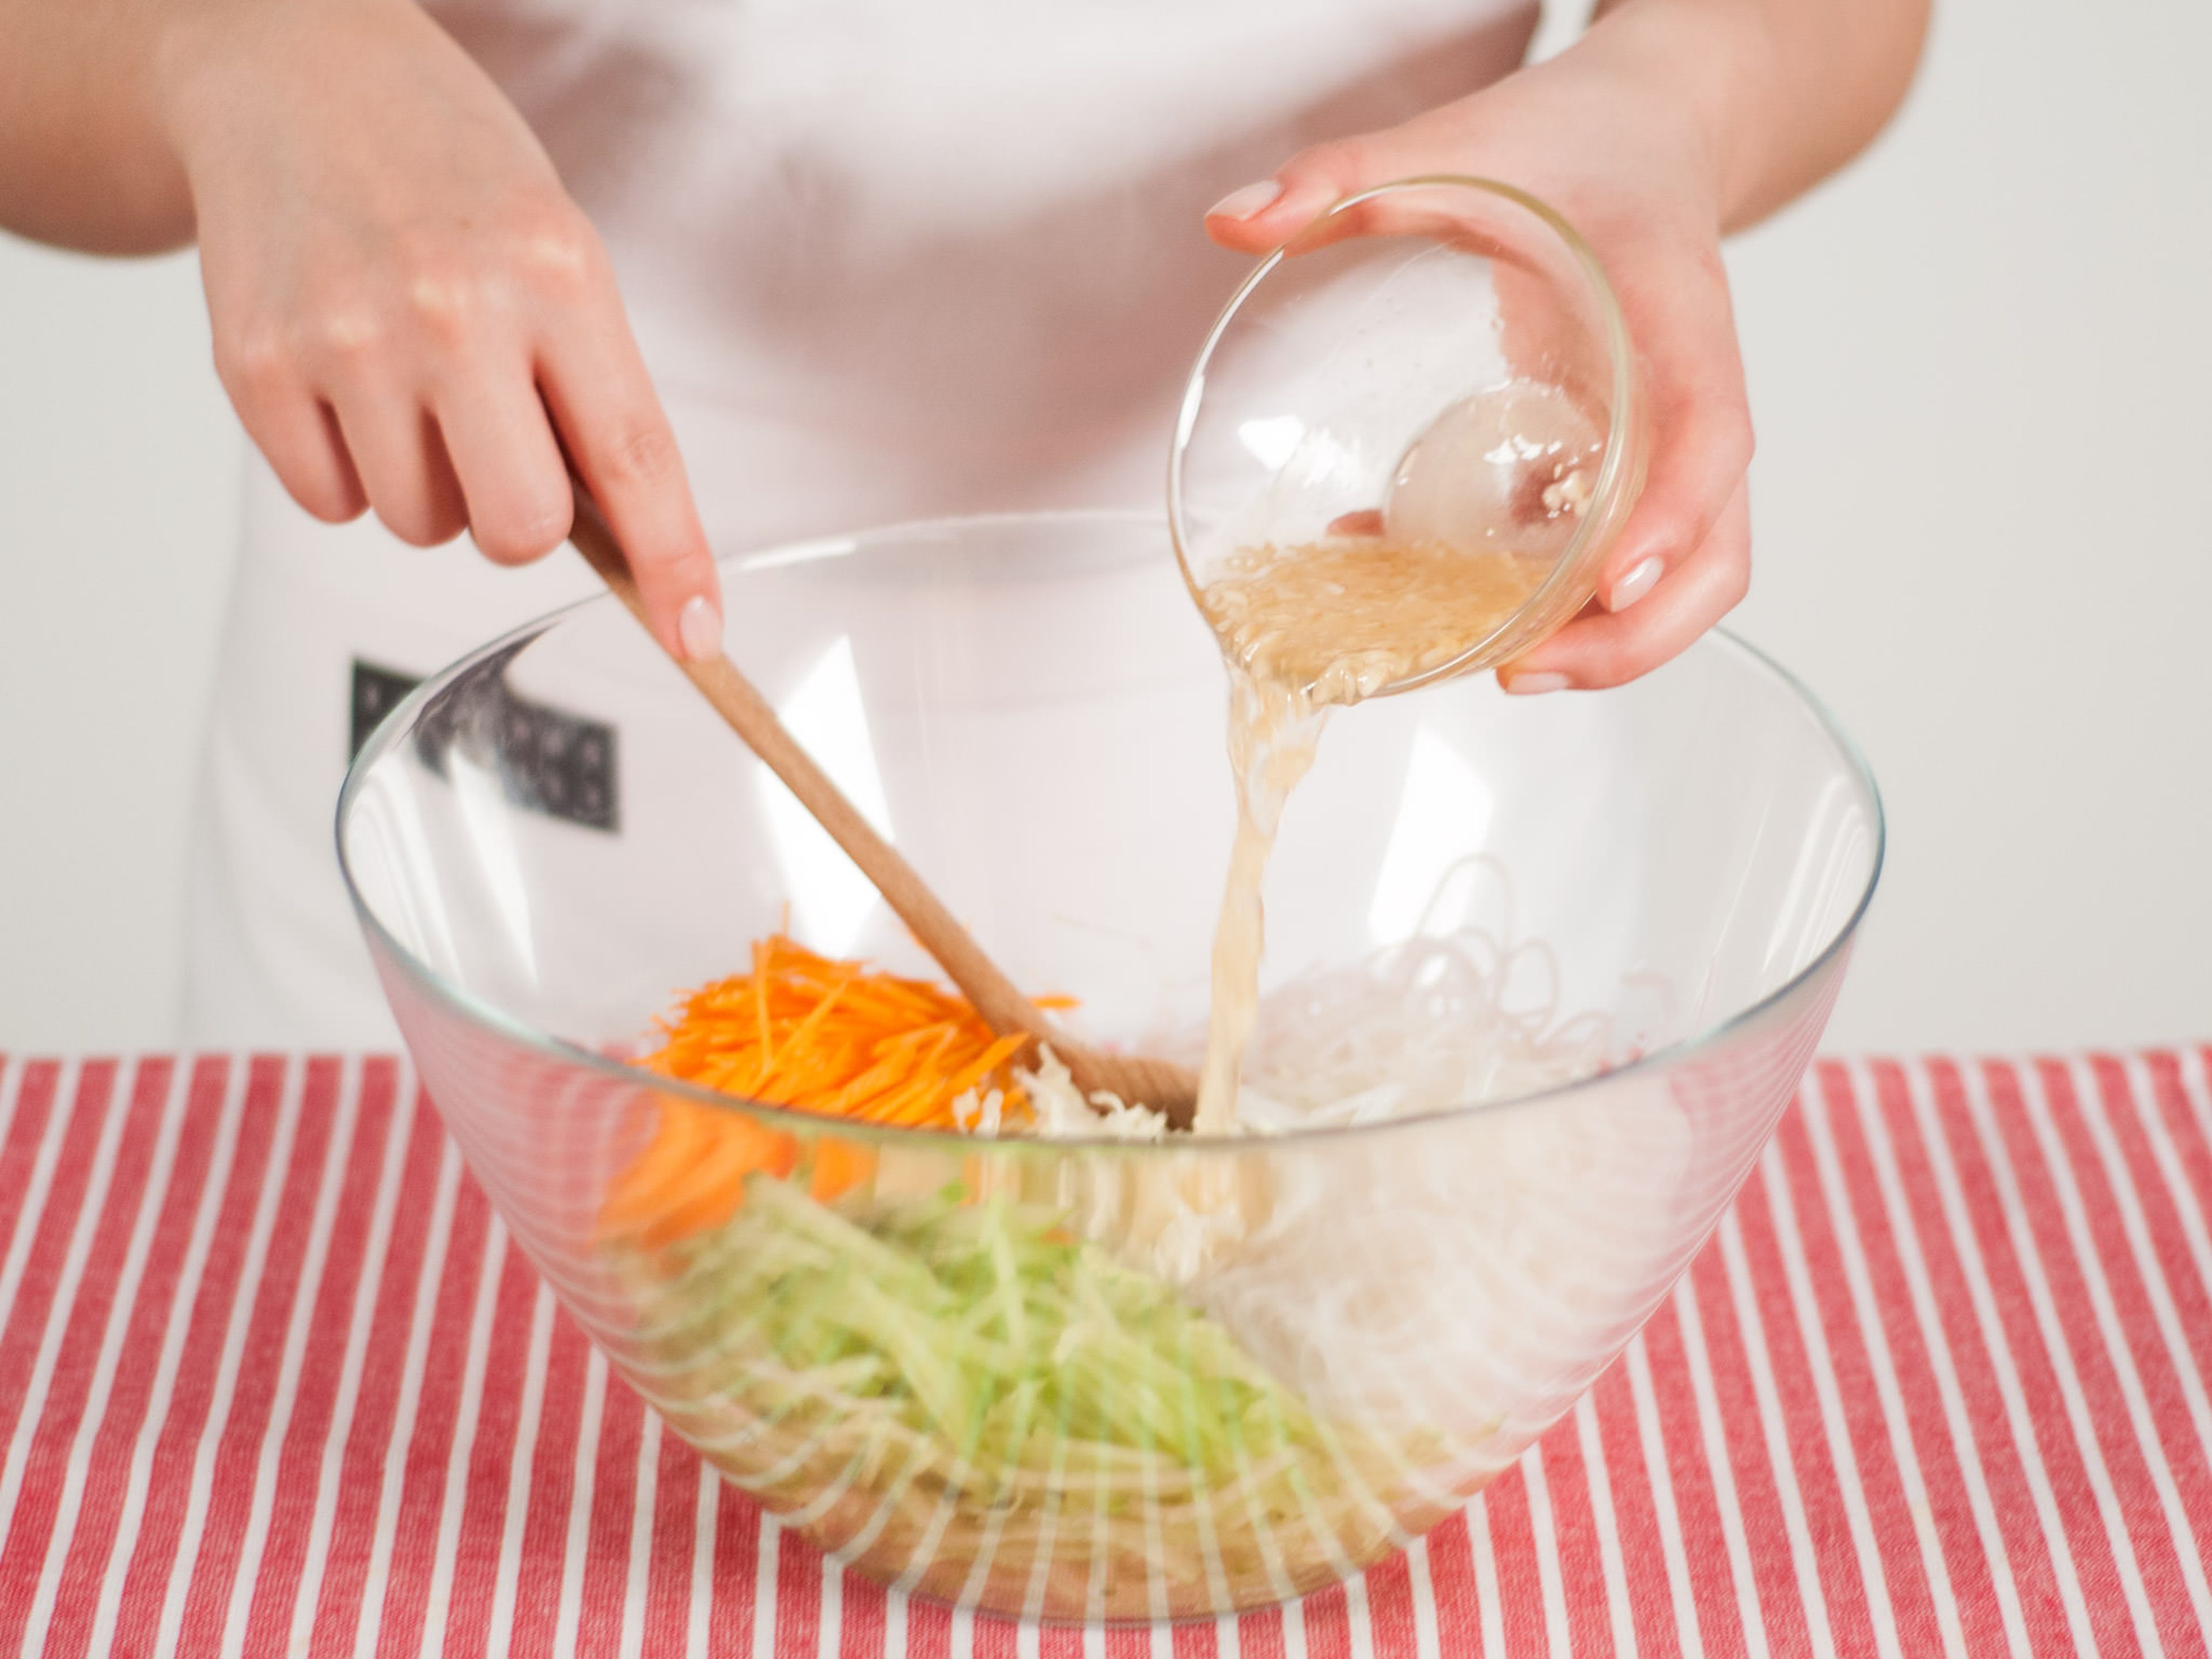 In a large bowl, combine cucumber, carrots, Chinese cabbage, and glass noodles. Add dressing and mix well.